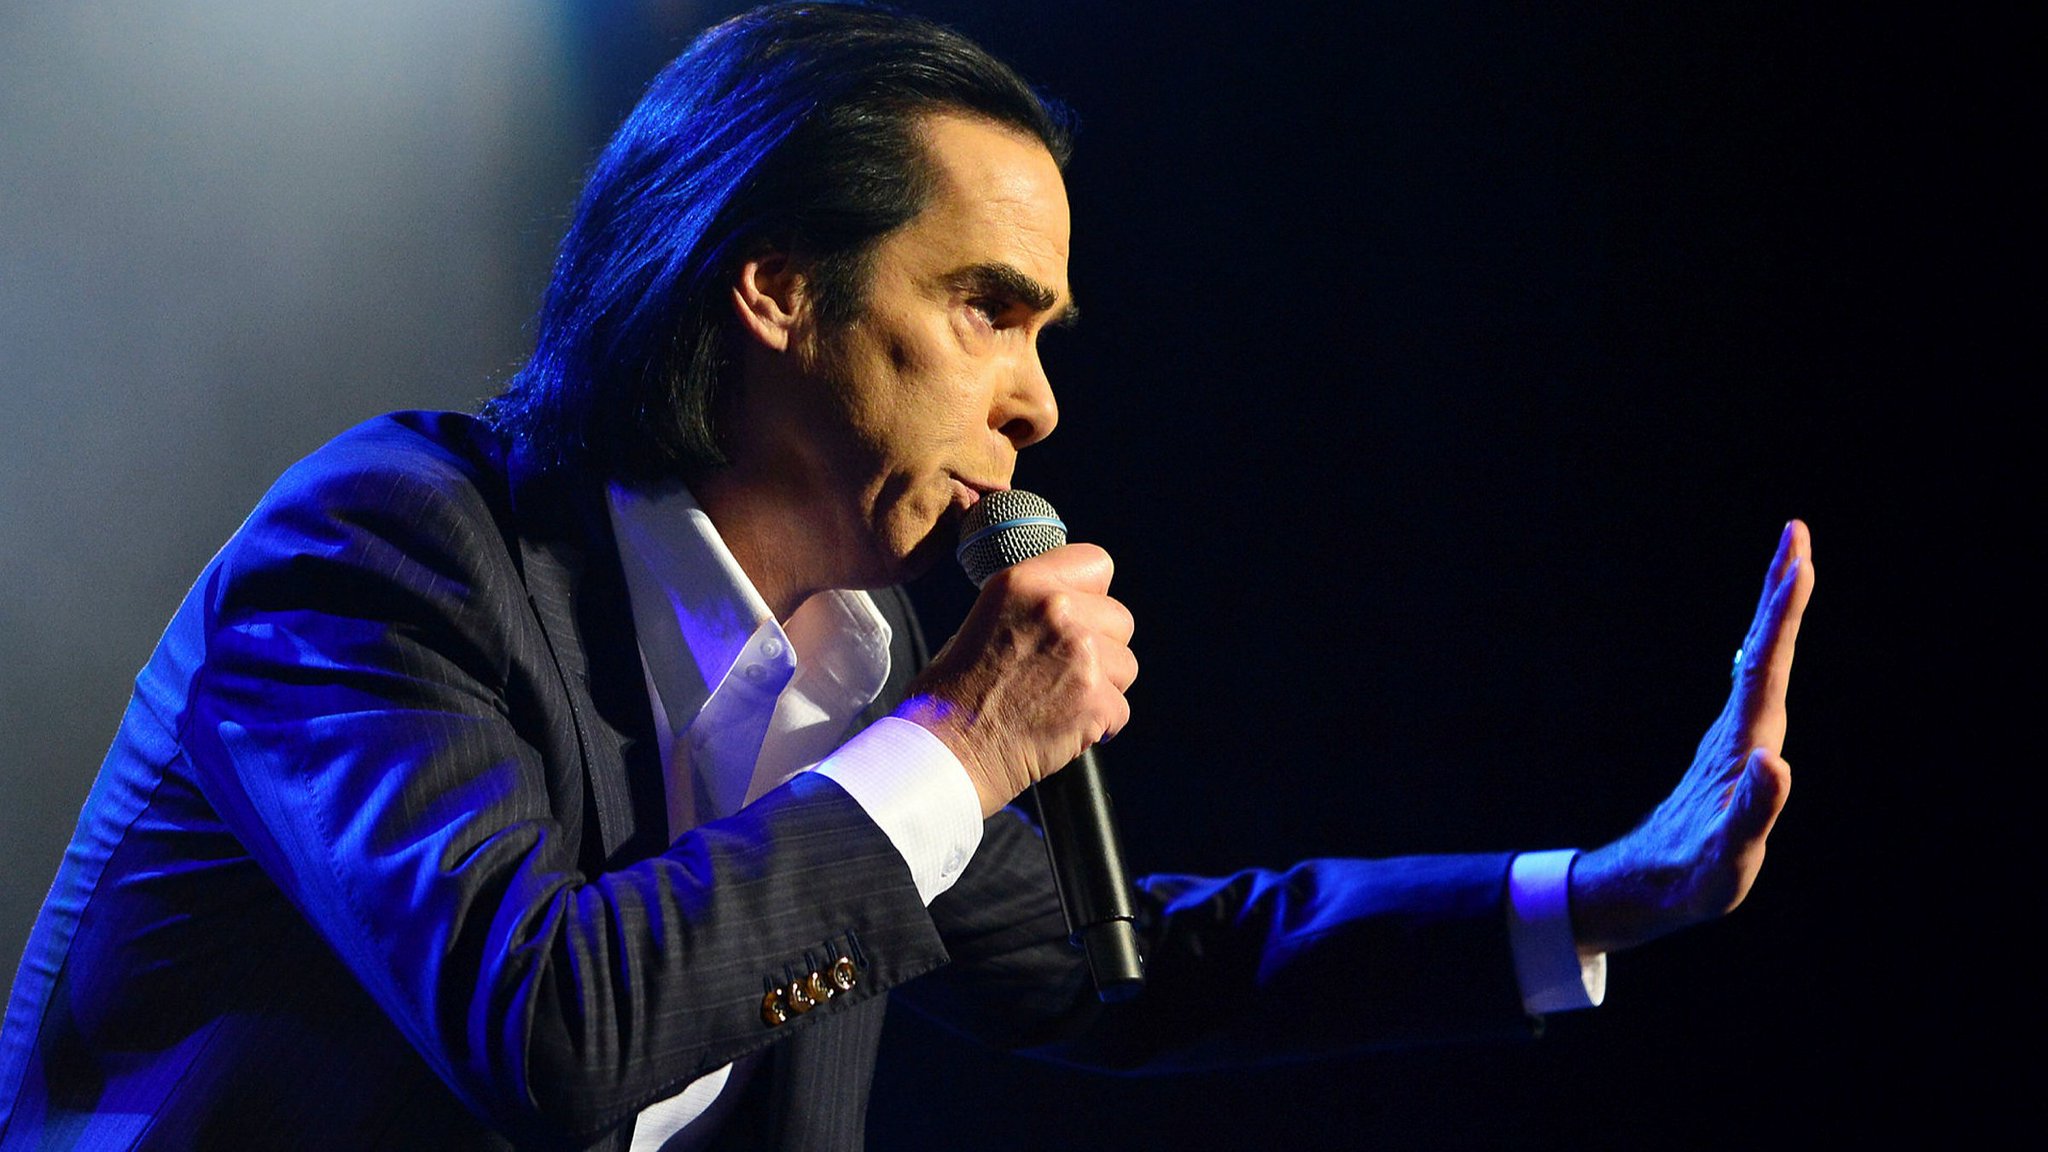 The superlative birthdays and releases of September 22. Big happy birthday wishes today to Nick Cave! 